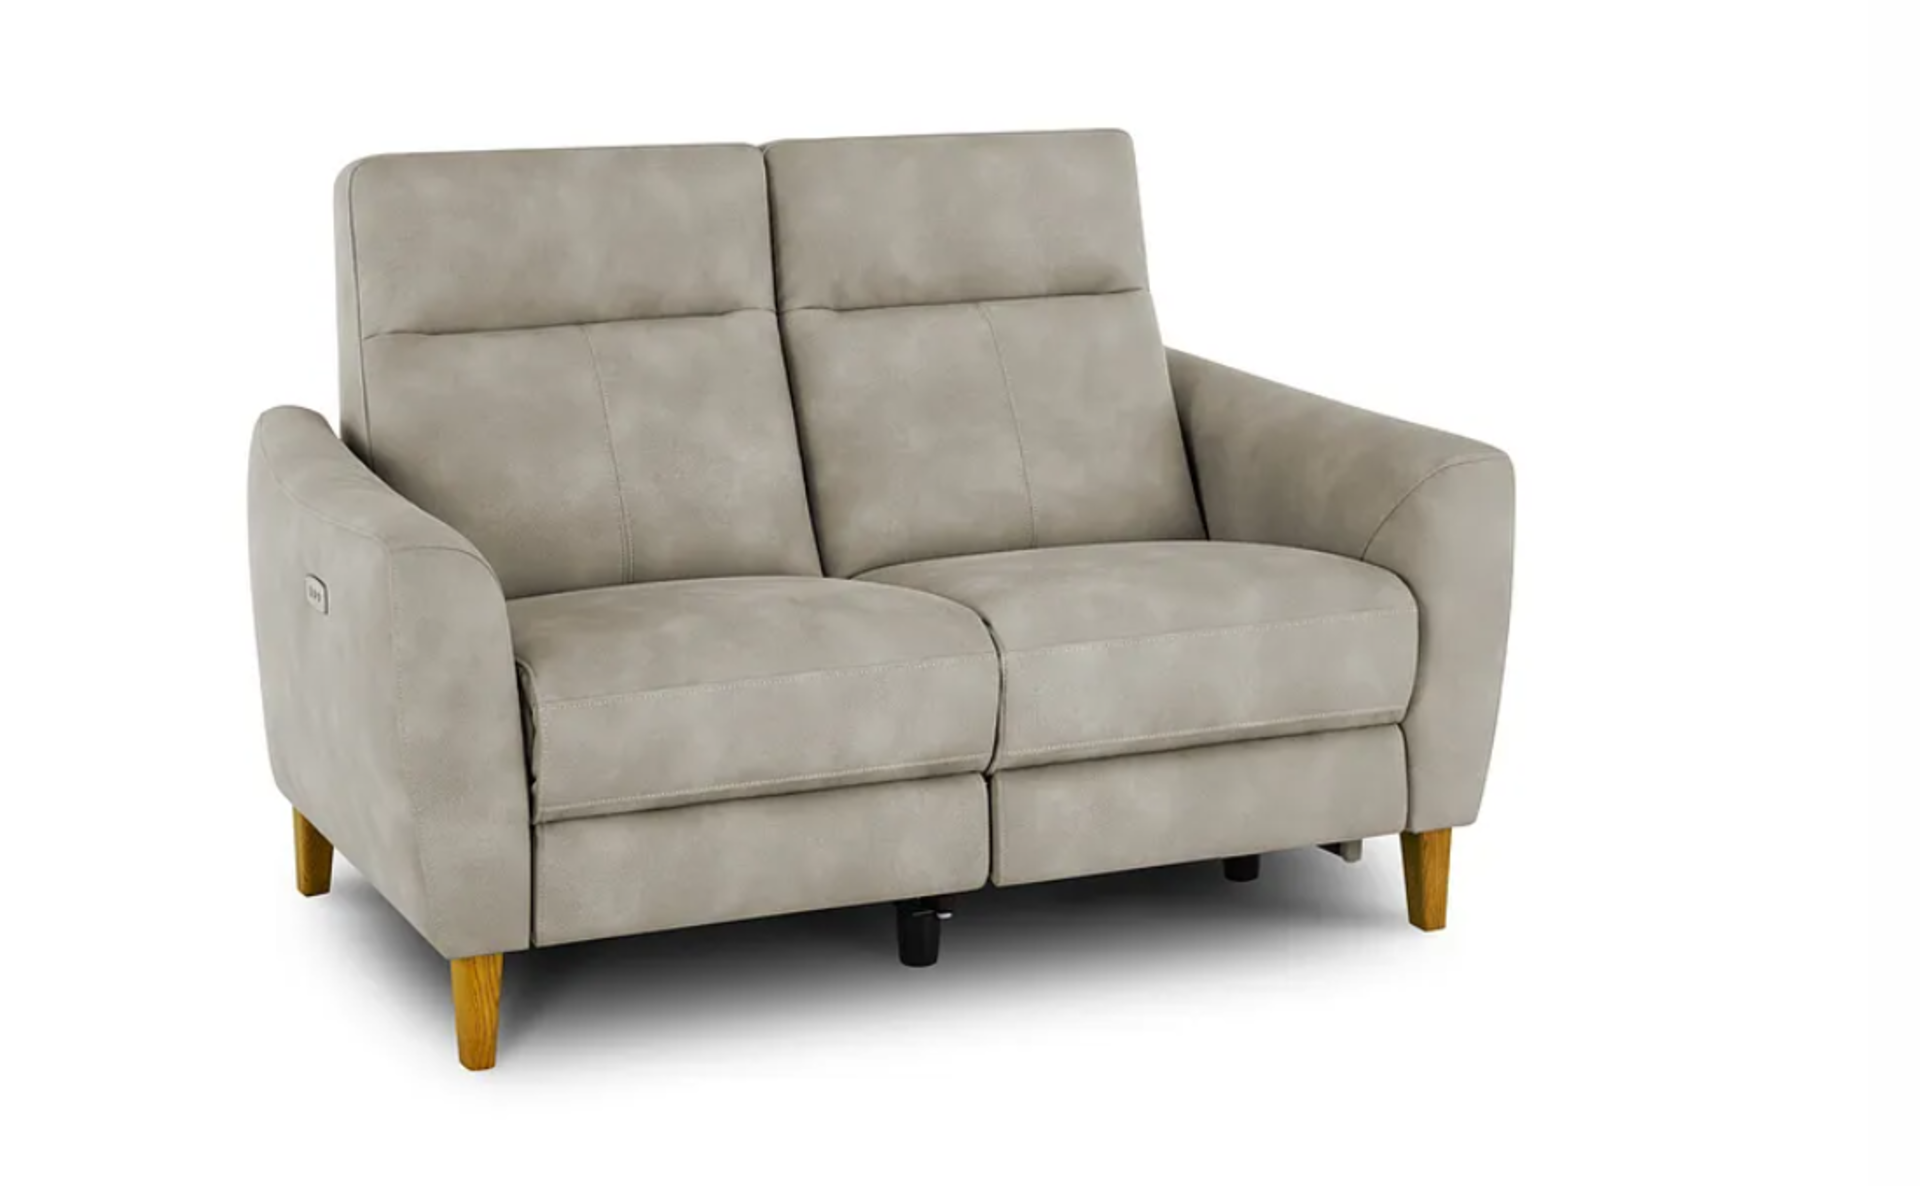 DYLAN 2 Seater Electric Recliner Sofa | Oxford Beige Fabric. RRP £1,329.00. Our Dylan 2-seater